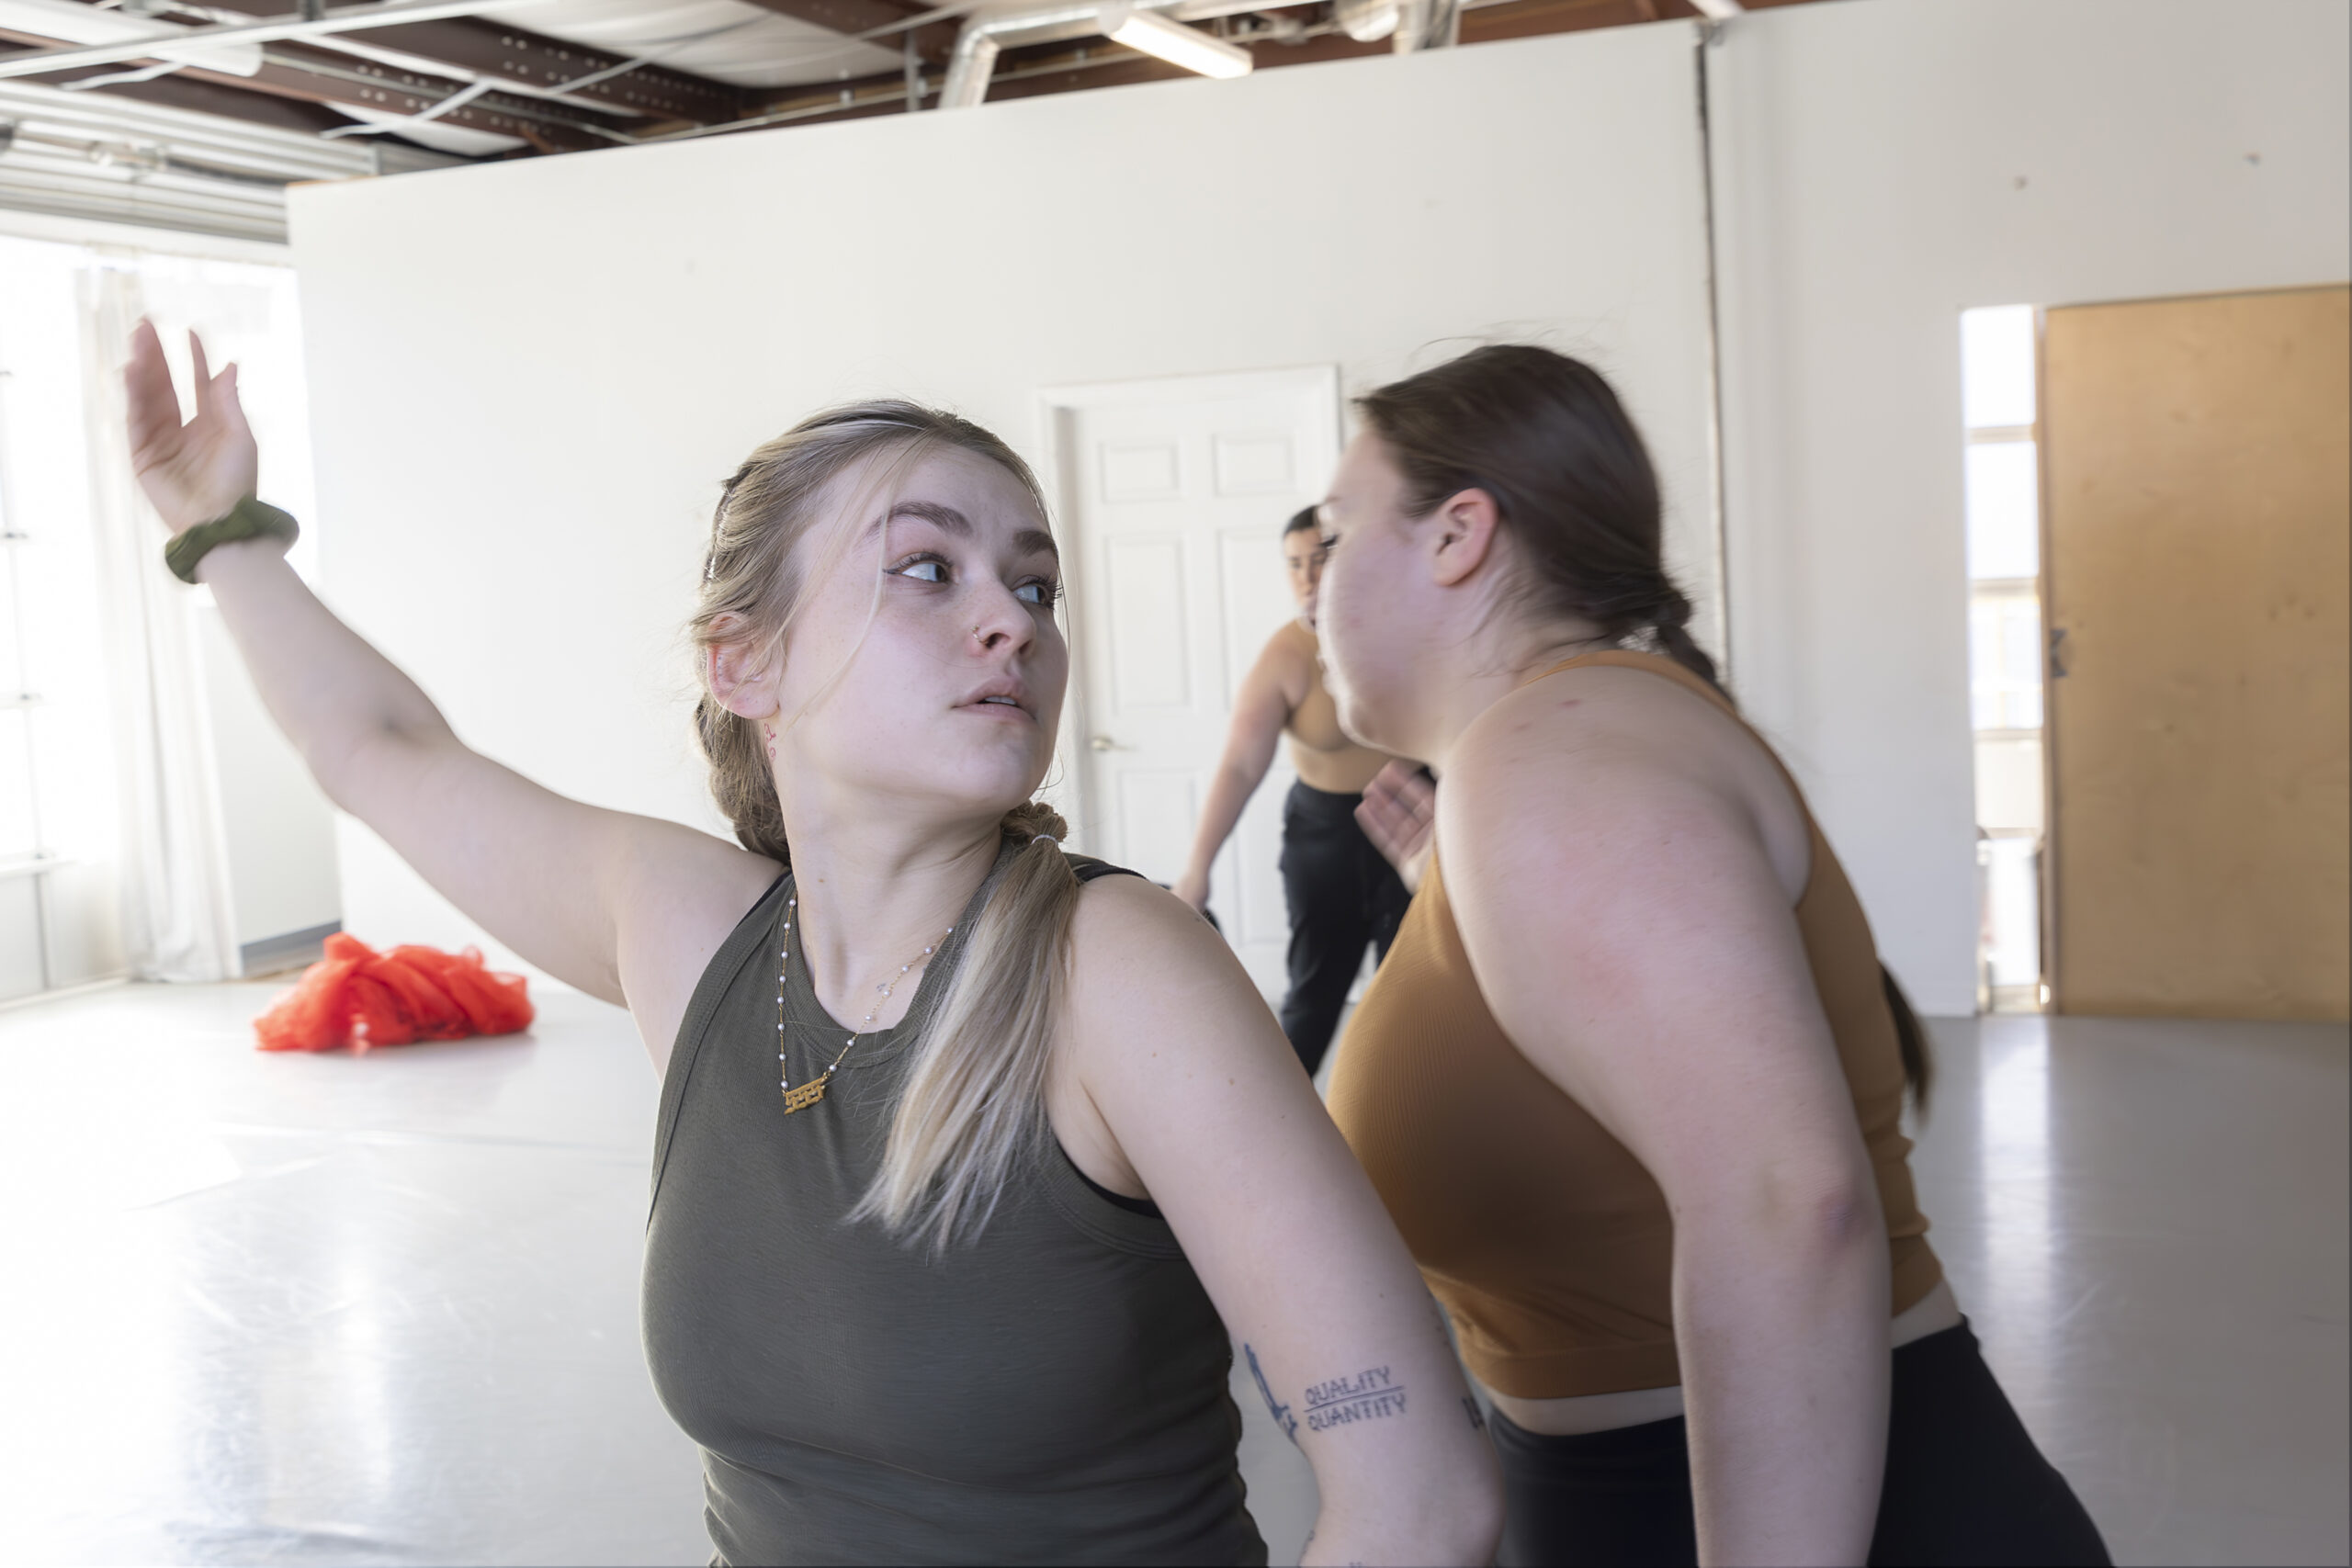 AK Bayer, a nonbinary, disabled dancer looks to the left. They are lifting their right arm to the side. Behind AK, Cecilia, a tan skinned Hispanic disabled woman, leans away from AK.